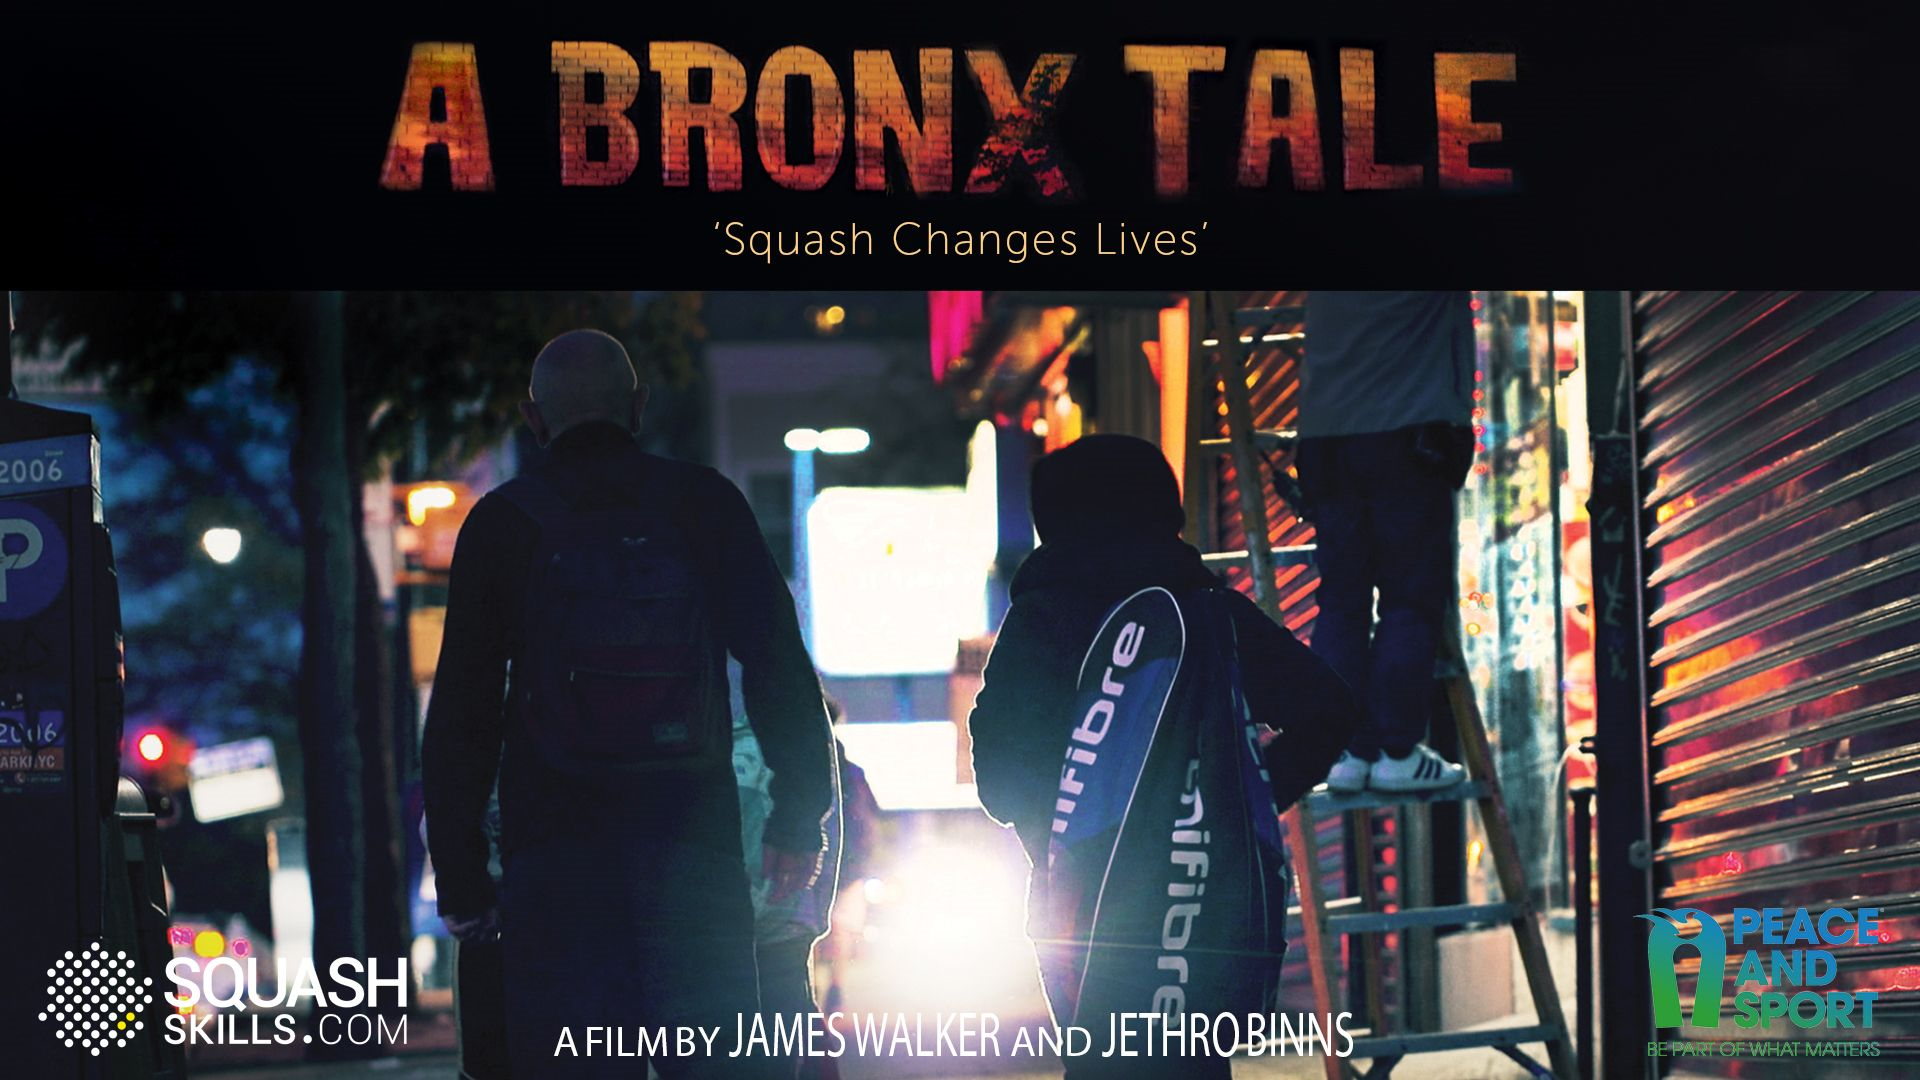 World Squash Federation welcome nomination of 'A Bronx Tale' film for Peace and Sport prize